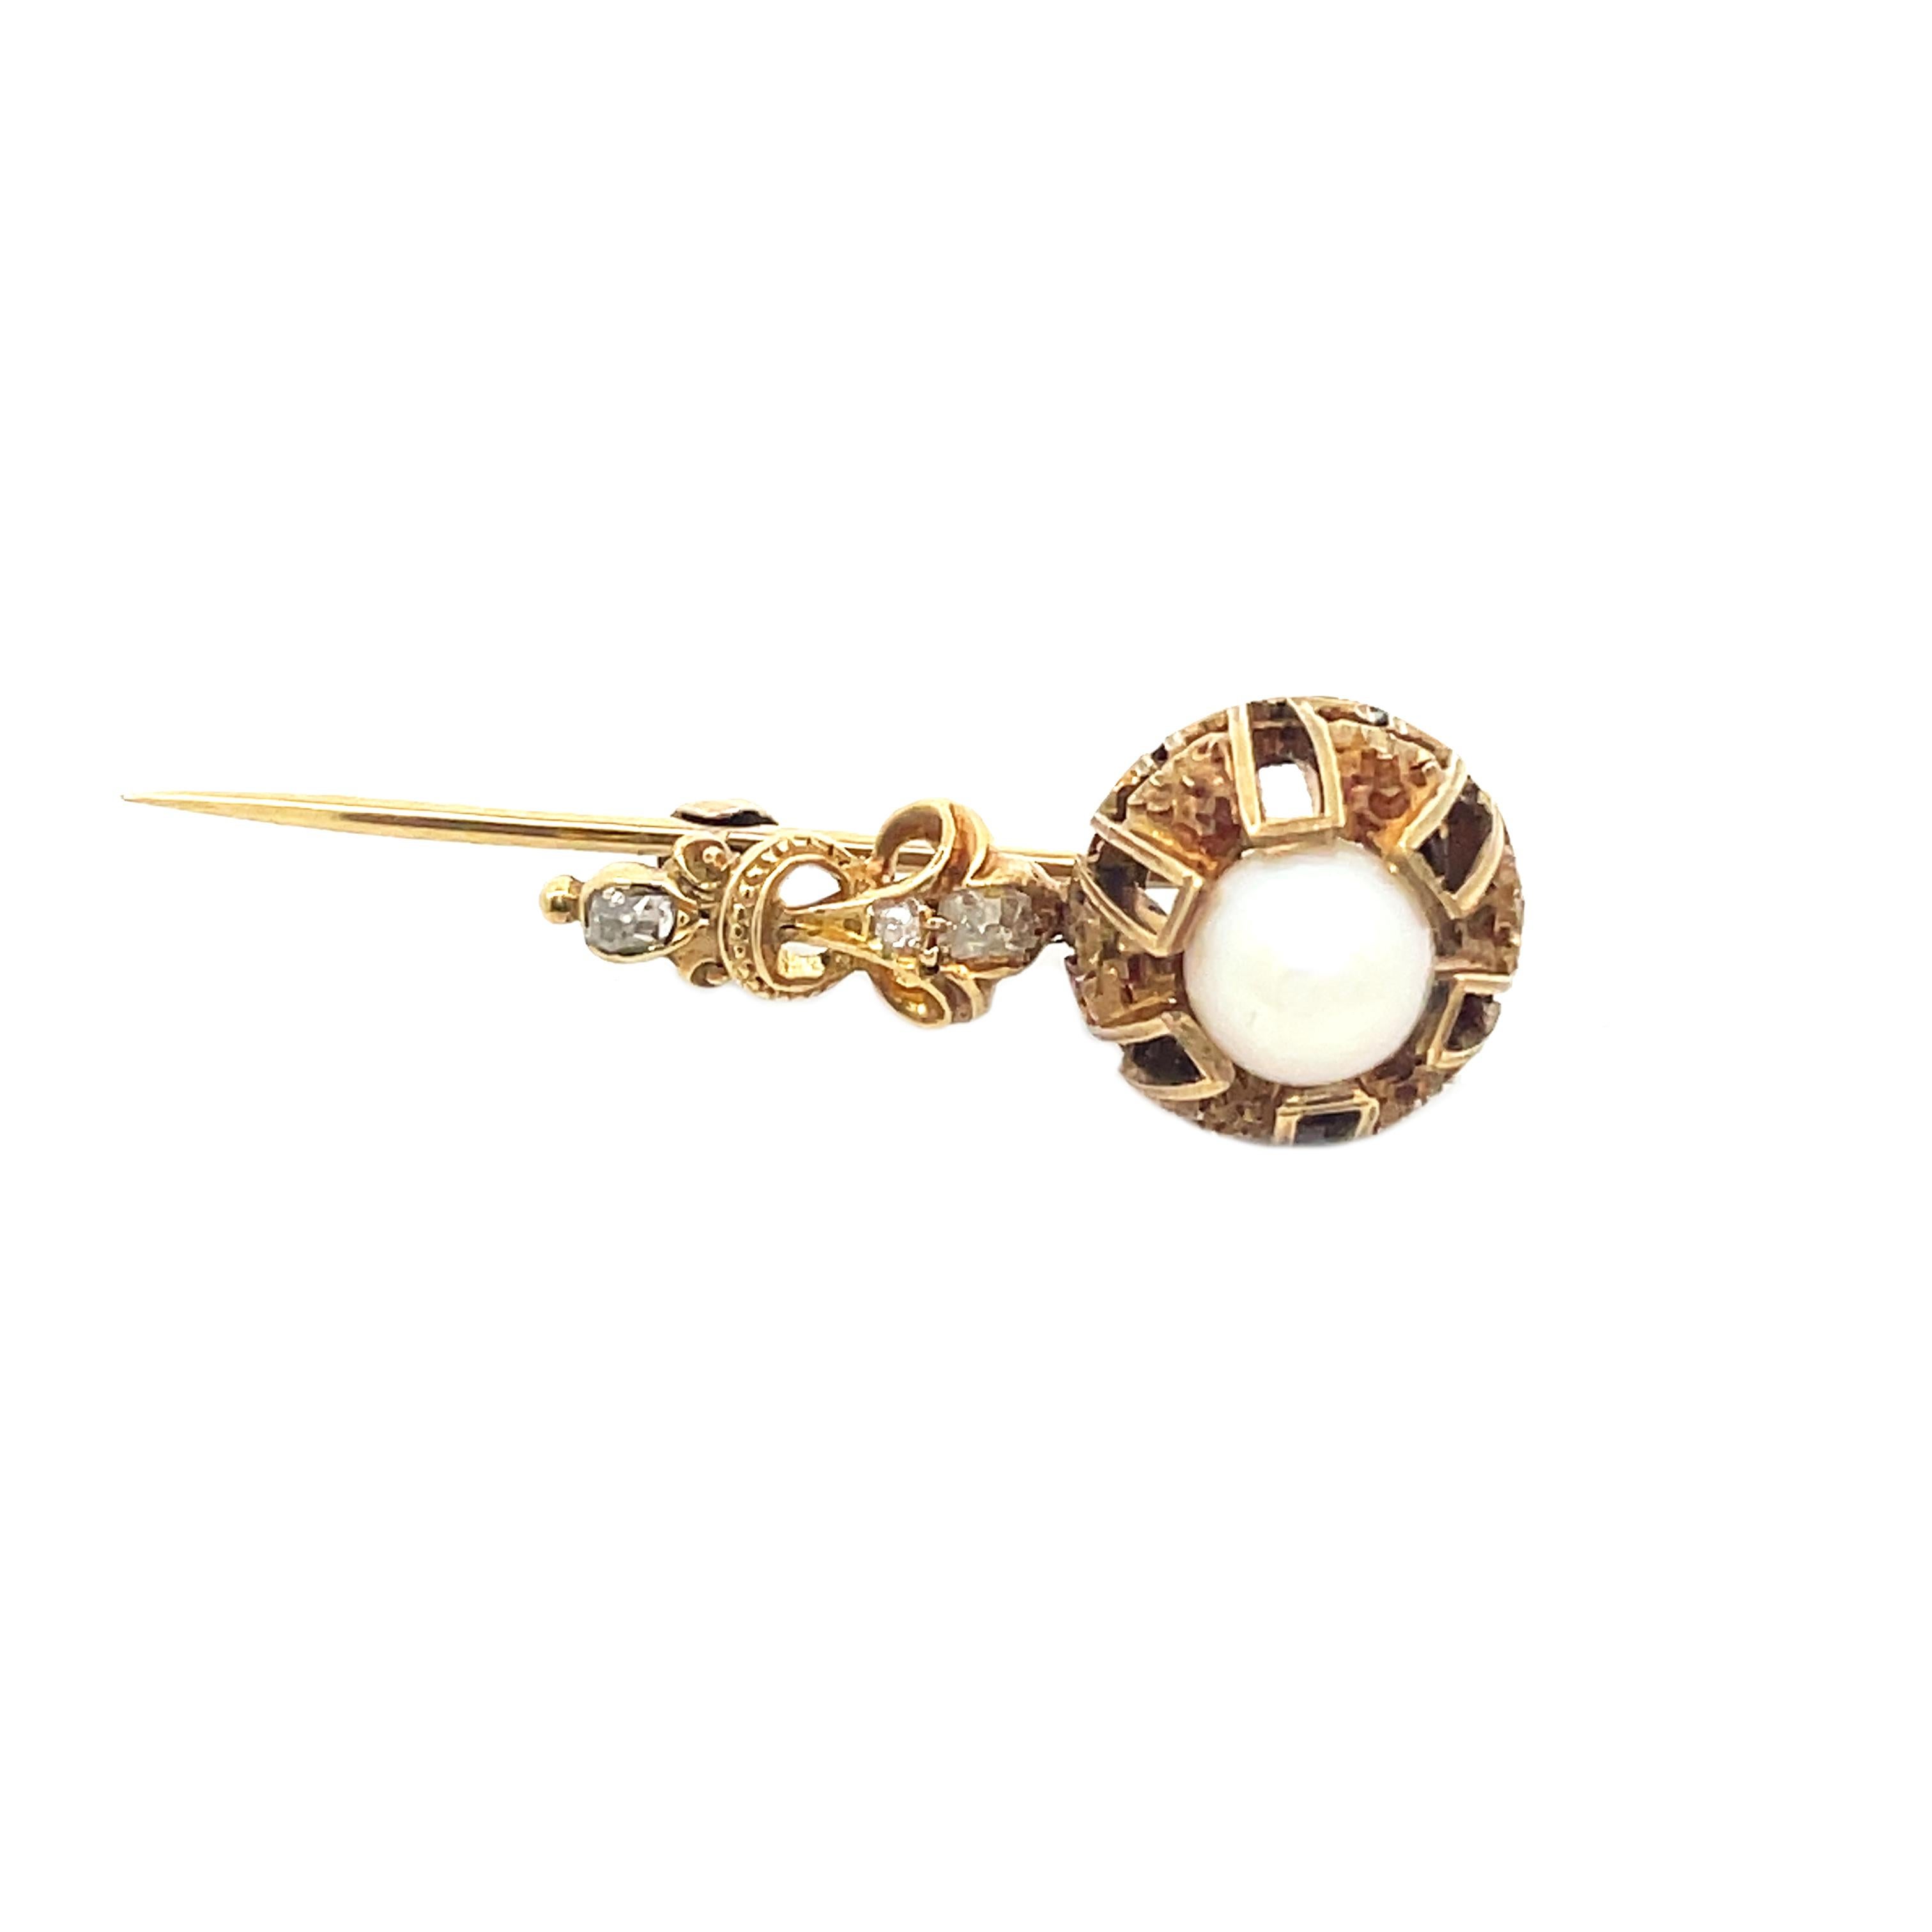 1860 Victorian Old Mine Cut Diamond and Natural Pearl Pin with GIA Report 1